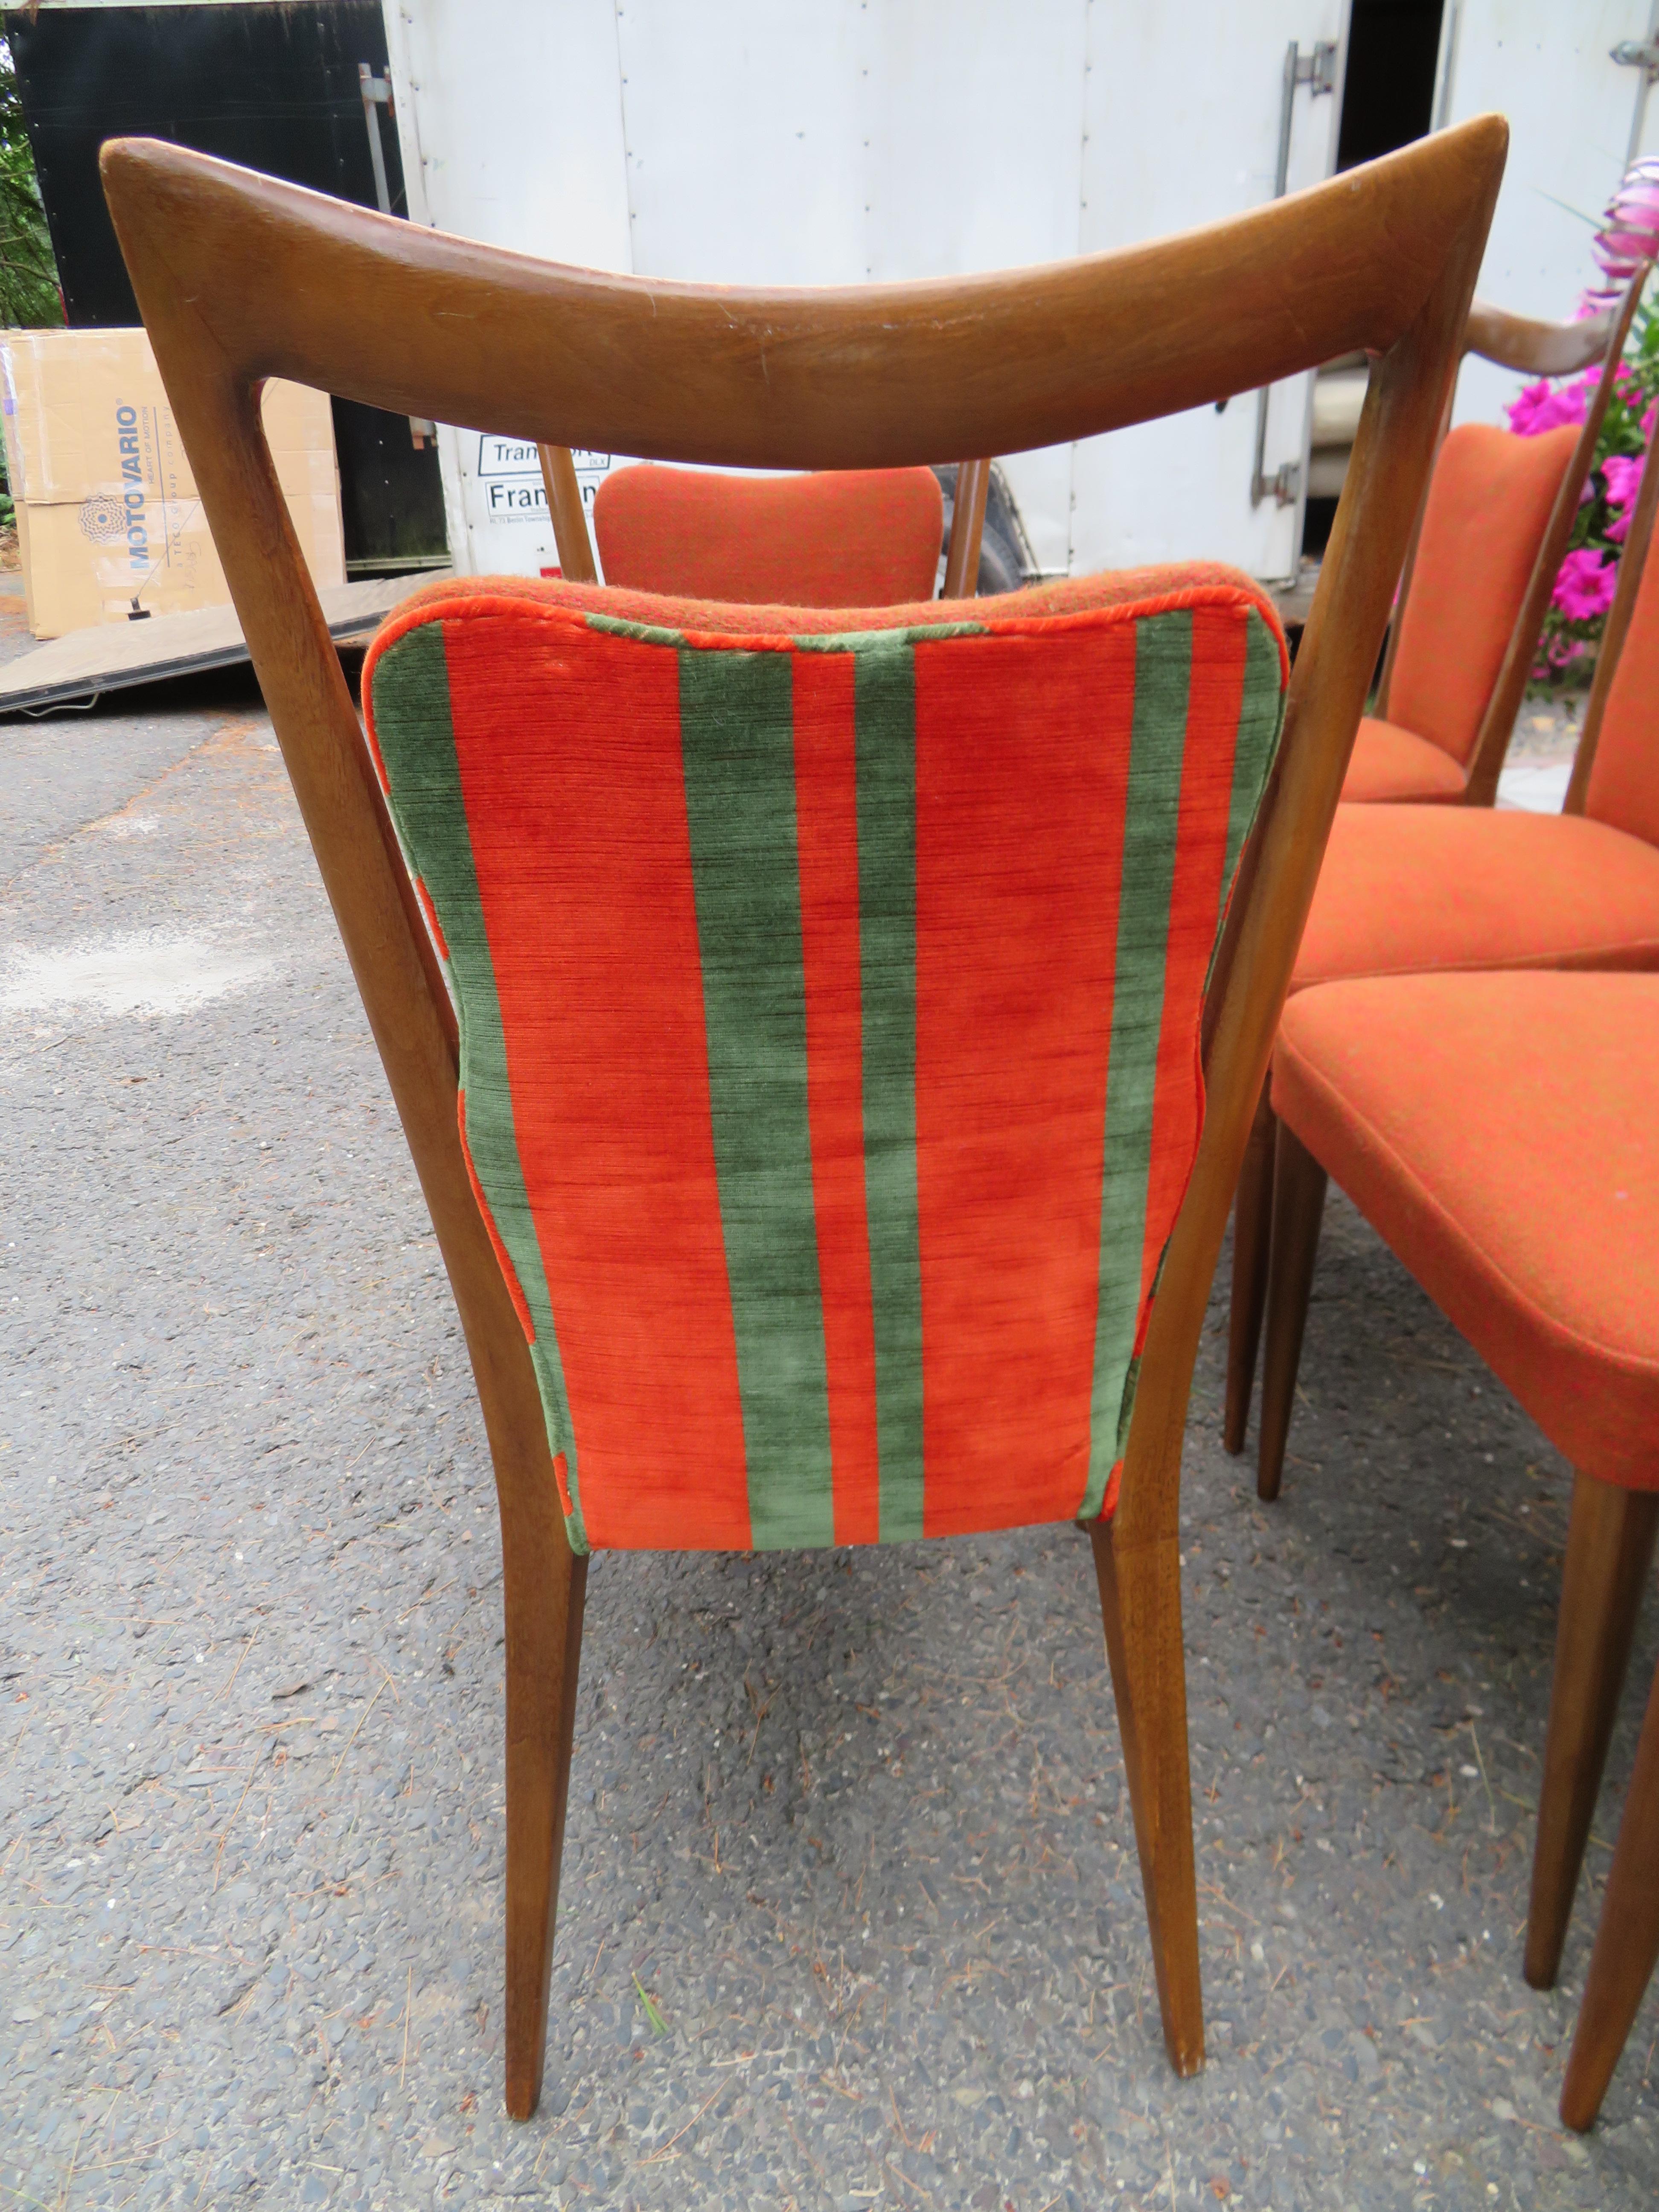 Fabulous Set of Six Italian Melchiorre Bega Dining Chairs Mid-Century Modern In Good Condition For Sale In Pemberton, NJ